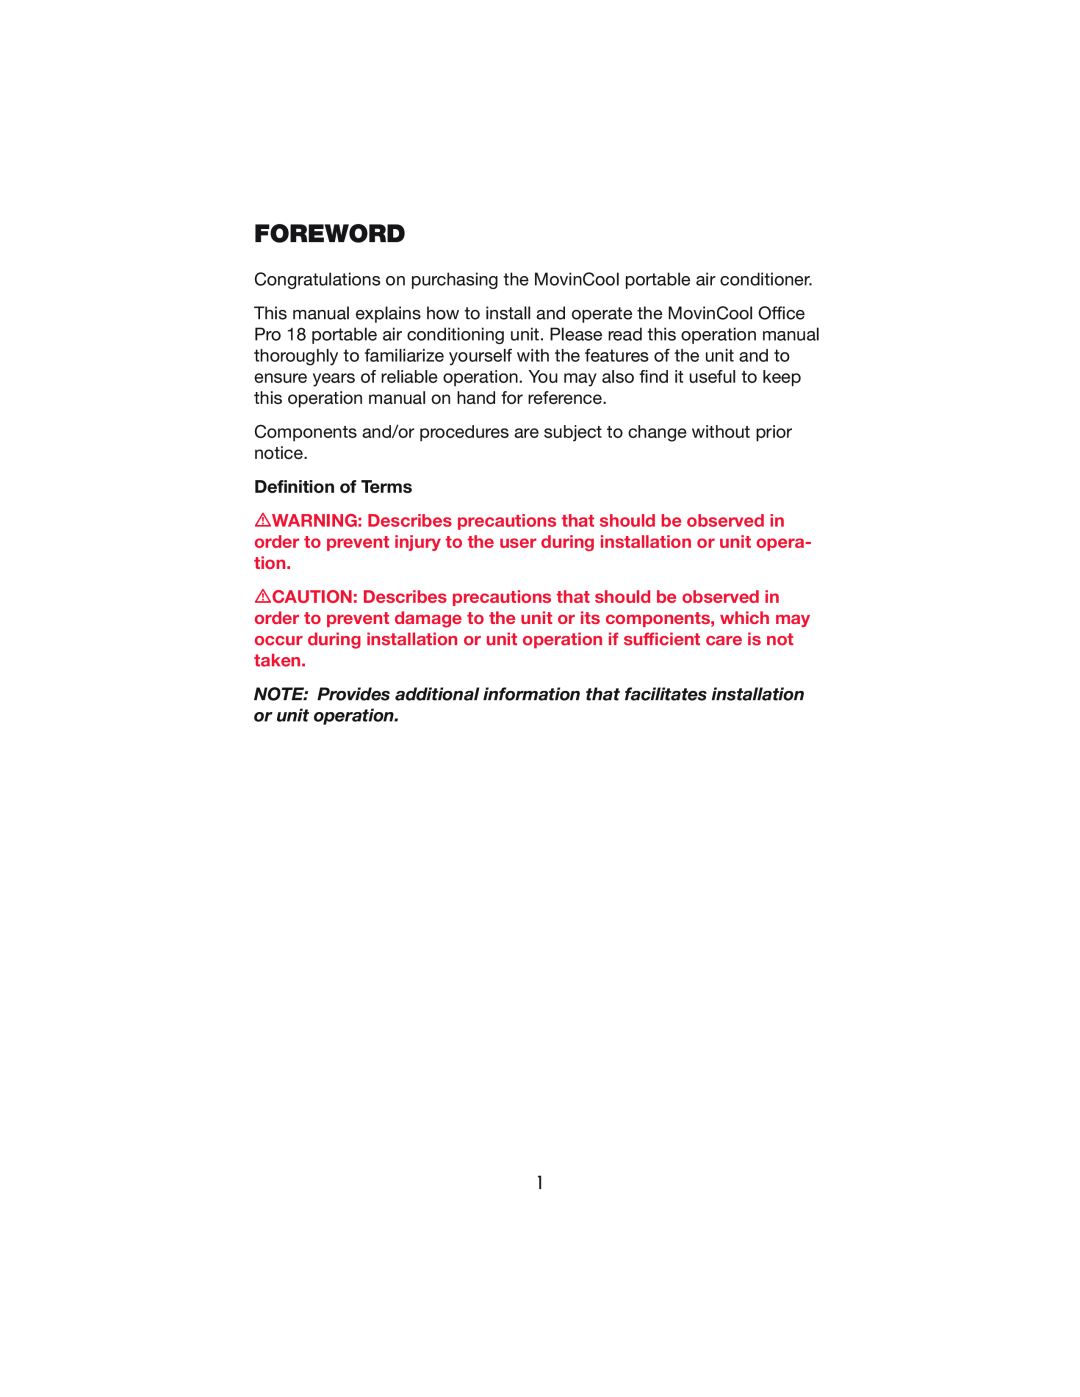 Denso PRO 18 operation manual Foreword, Definition of Terms 